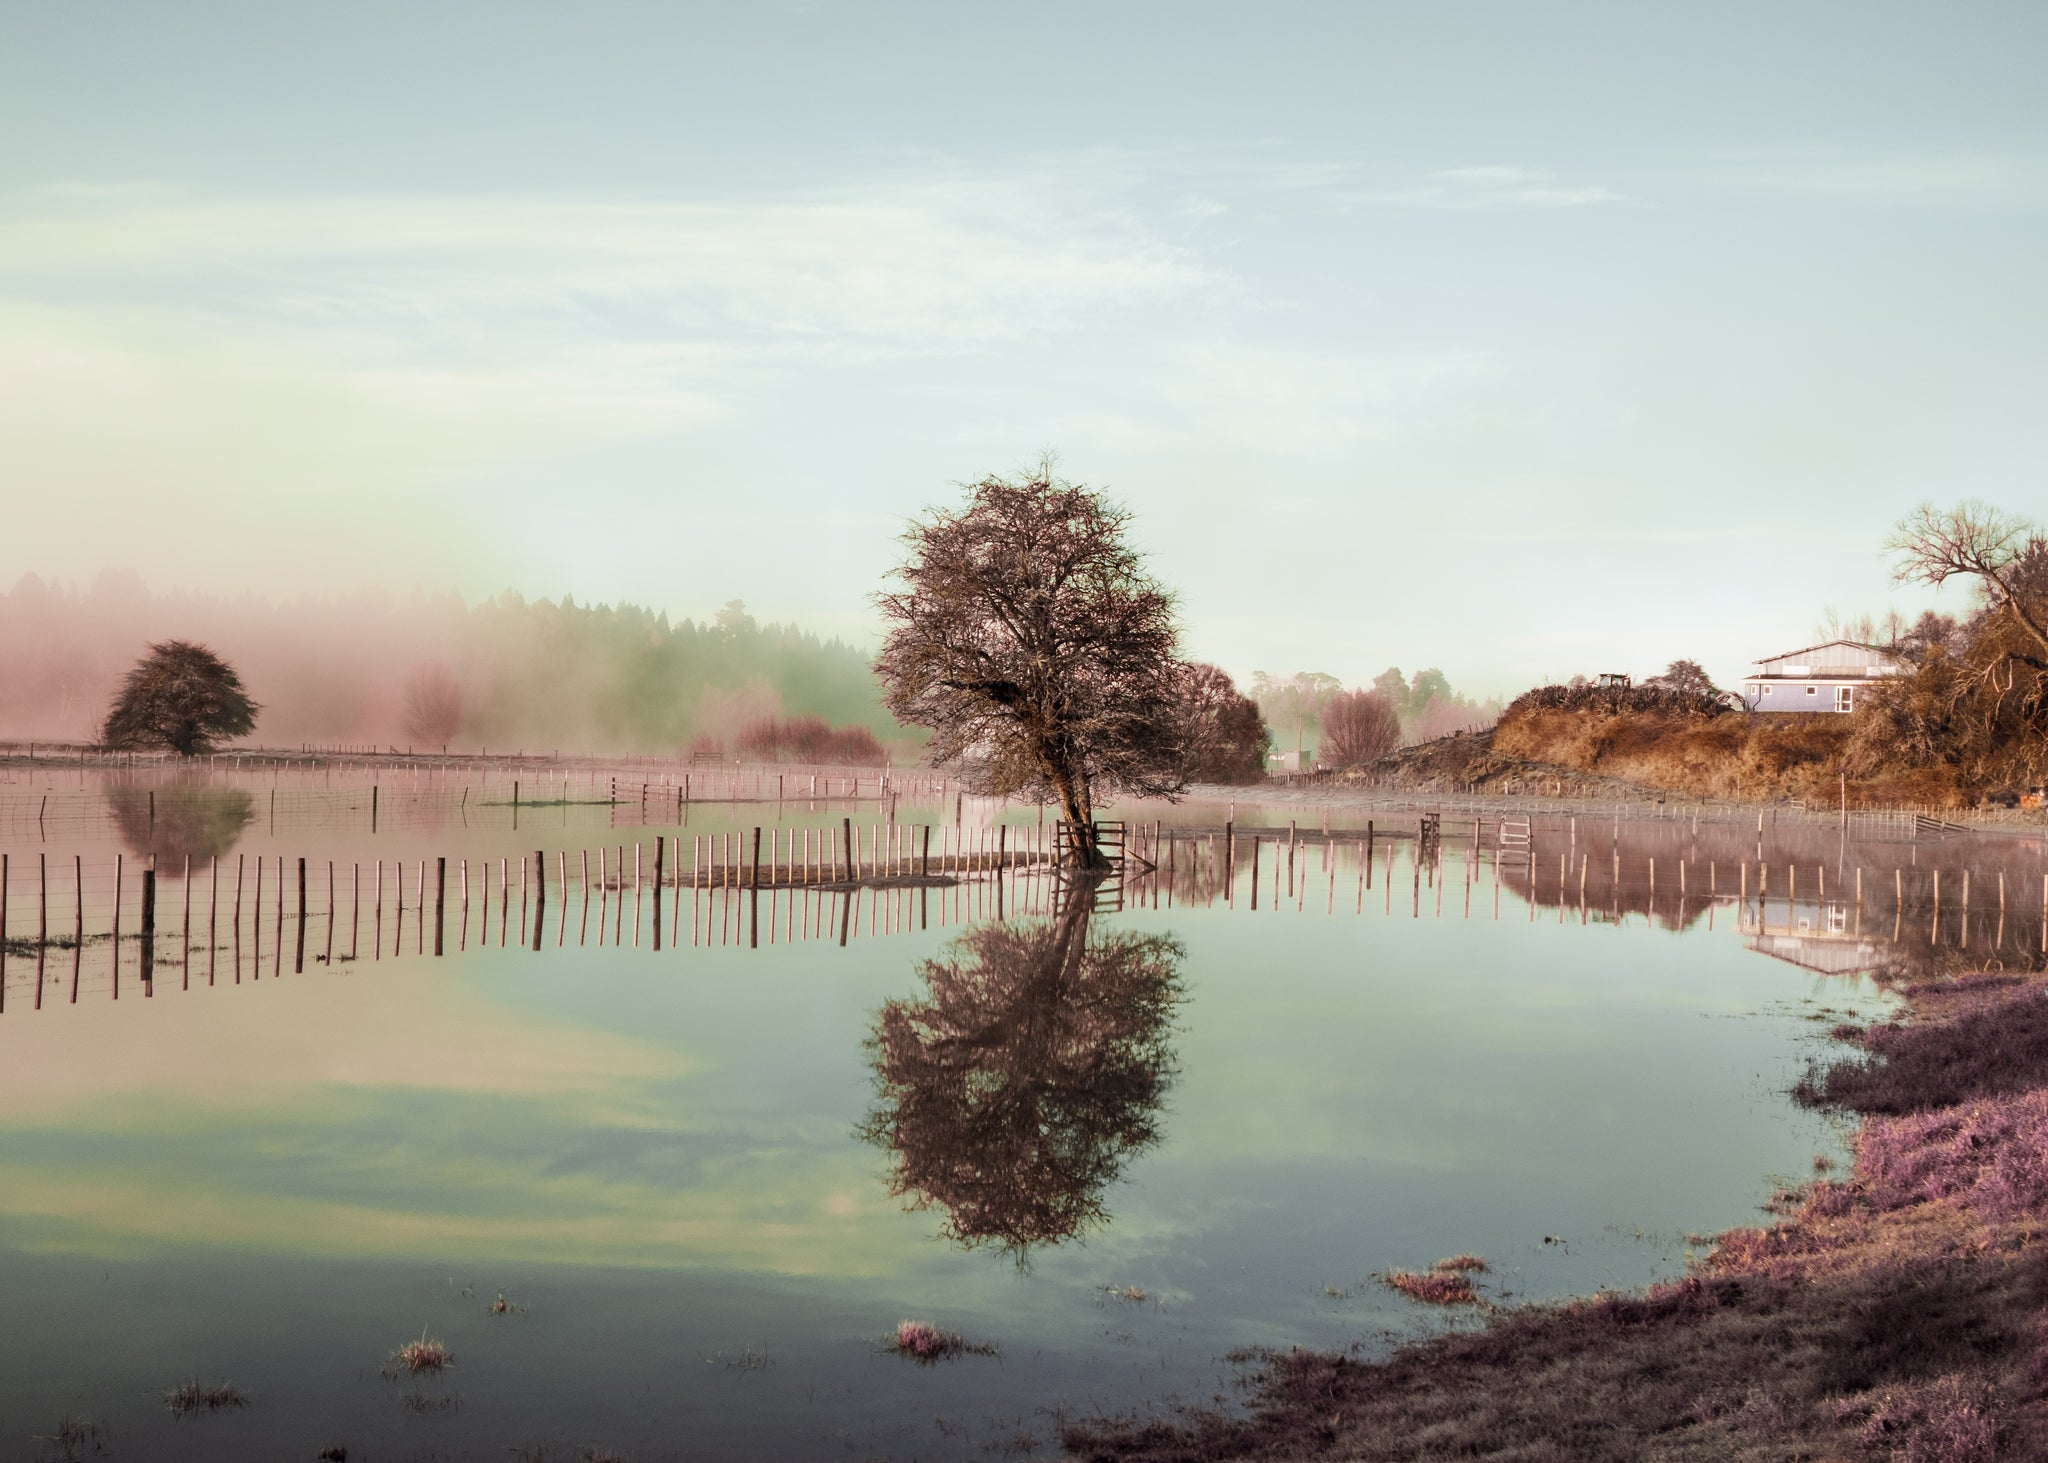 Filmic and surreal image of a flooded New Zealand paddock in dusky light. The calm waters perfectly reflect the lone tree and blue sky. 